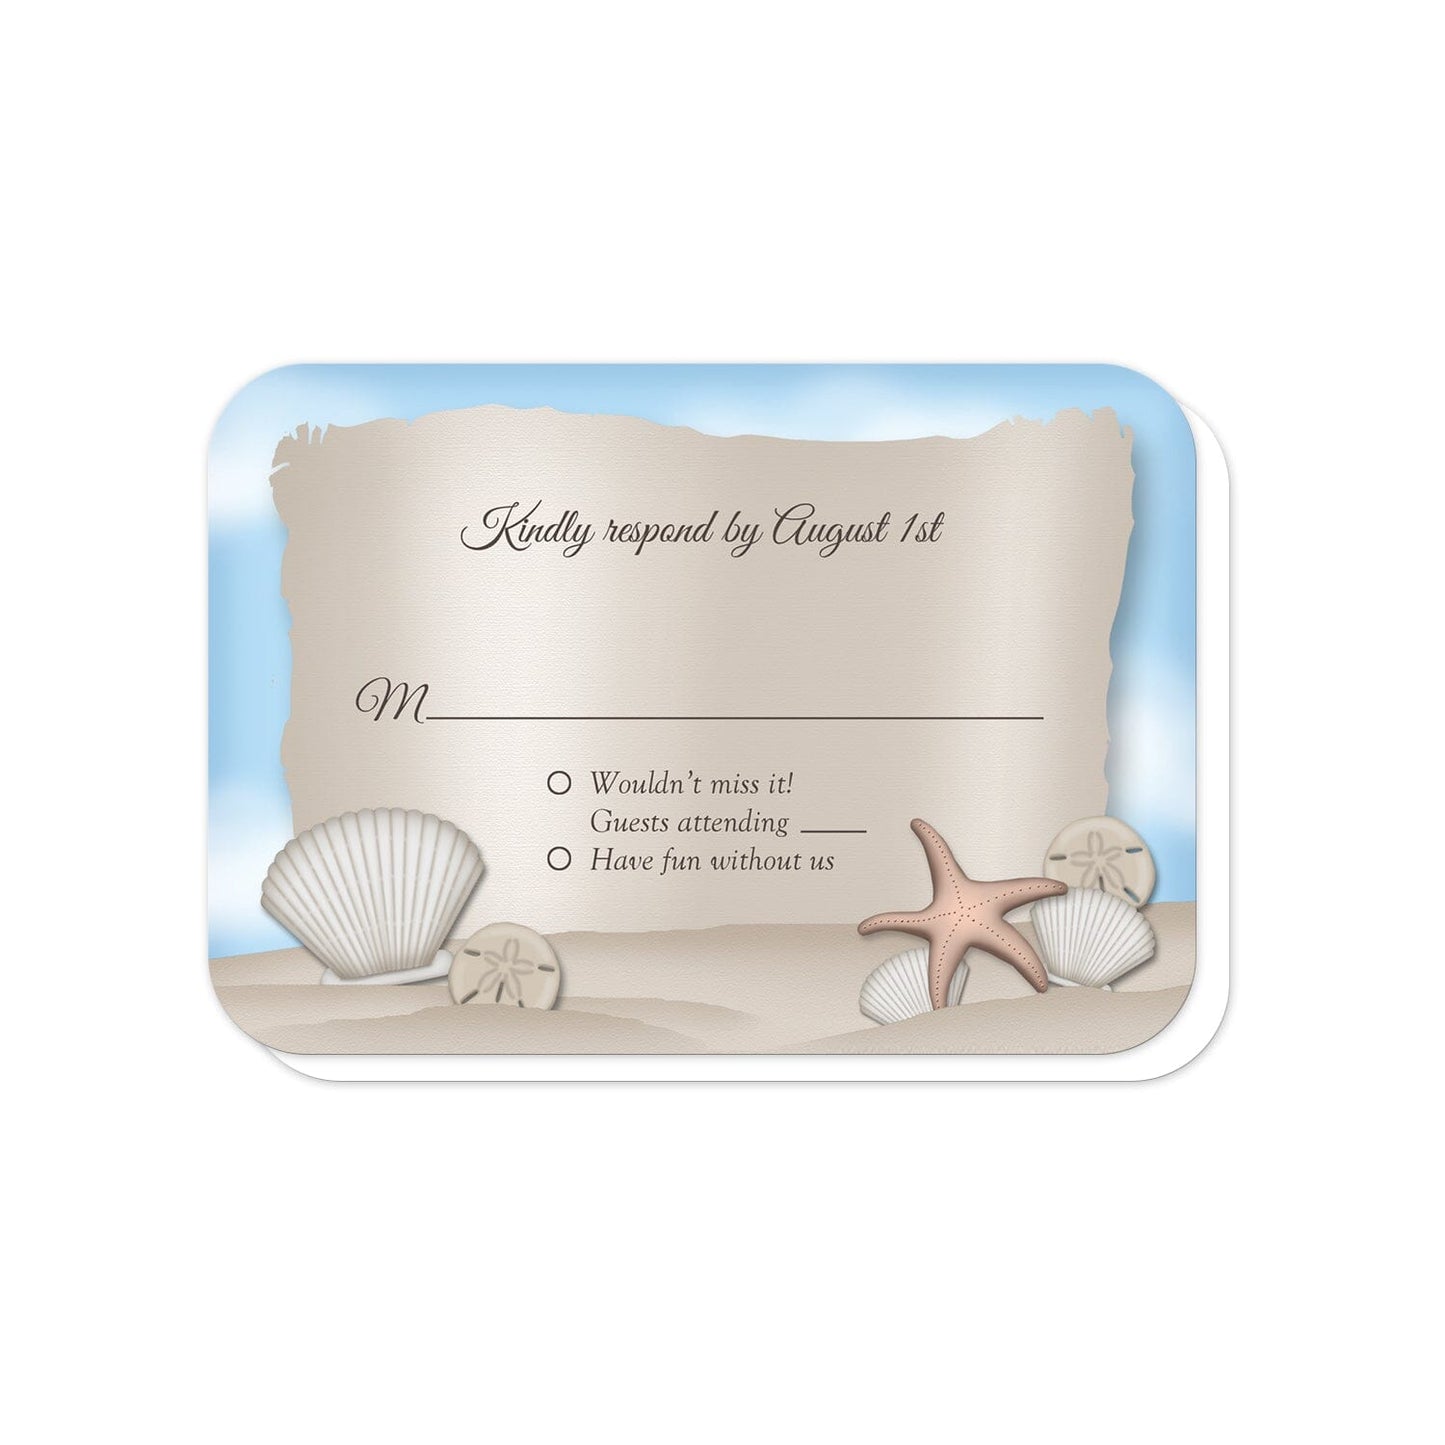 Message from a Bottle Beach RSVP Cards (with rounded corners) at Artistically Invited.